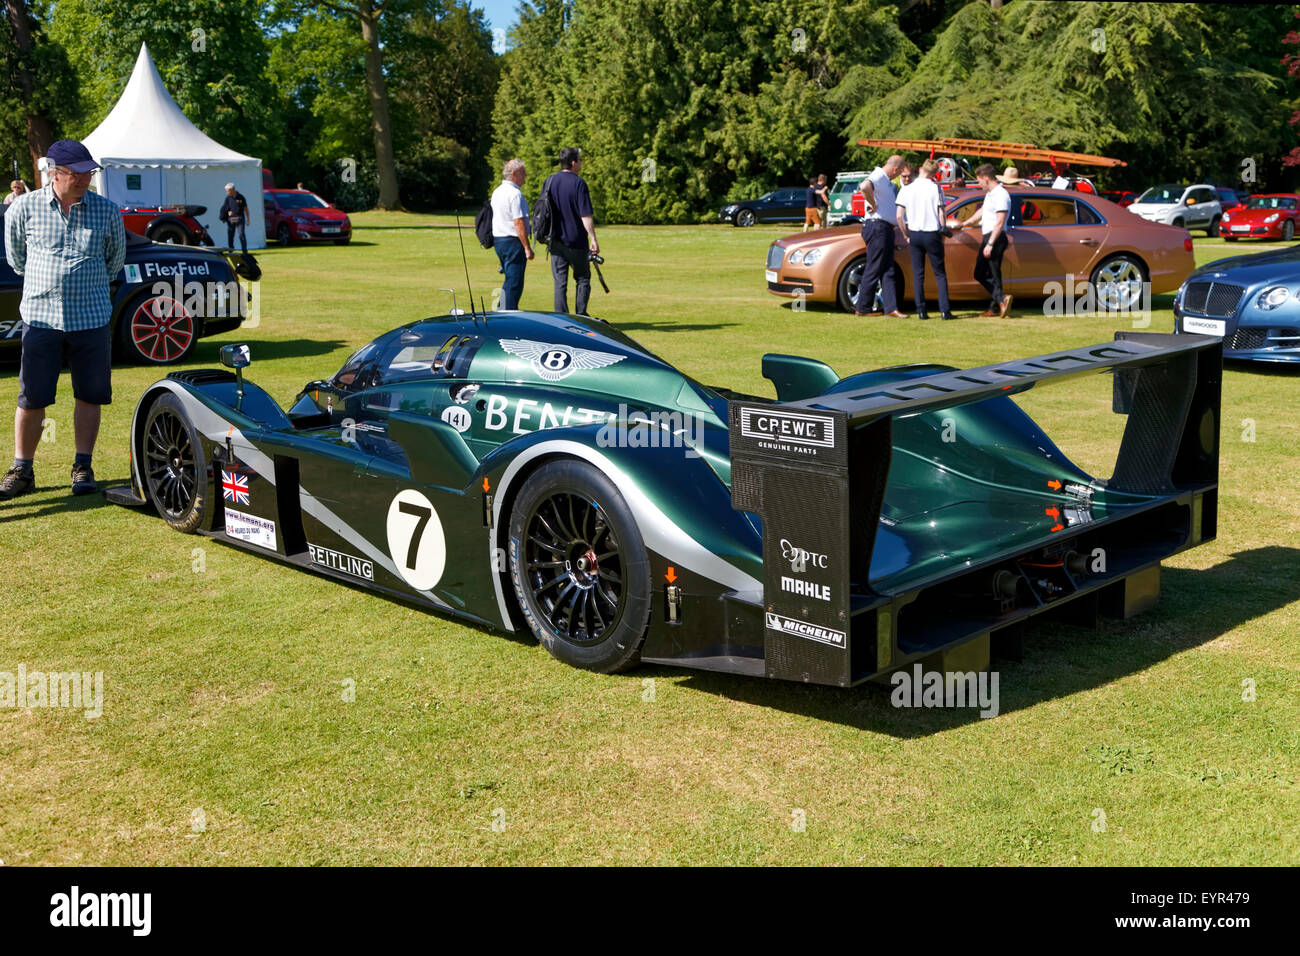 Number 7 British Racing Green 24 Hour Le Mans 2003 Race Winning Bentley Speed 8 racing car at Wilton Classic & Supercar Show. Stock Photo